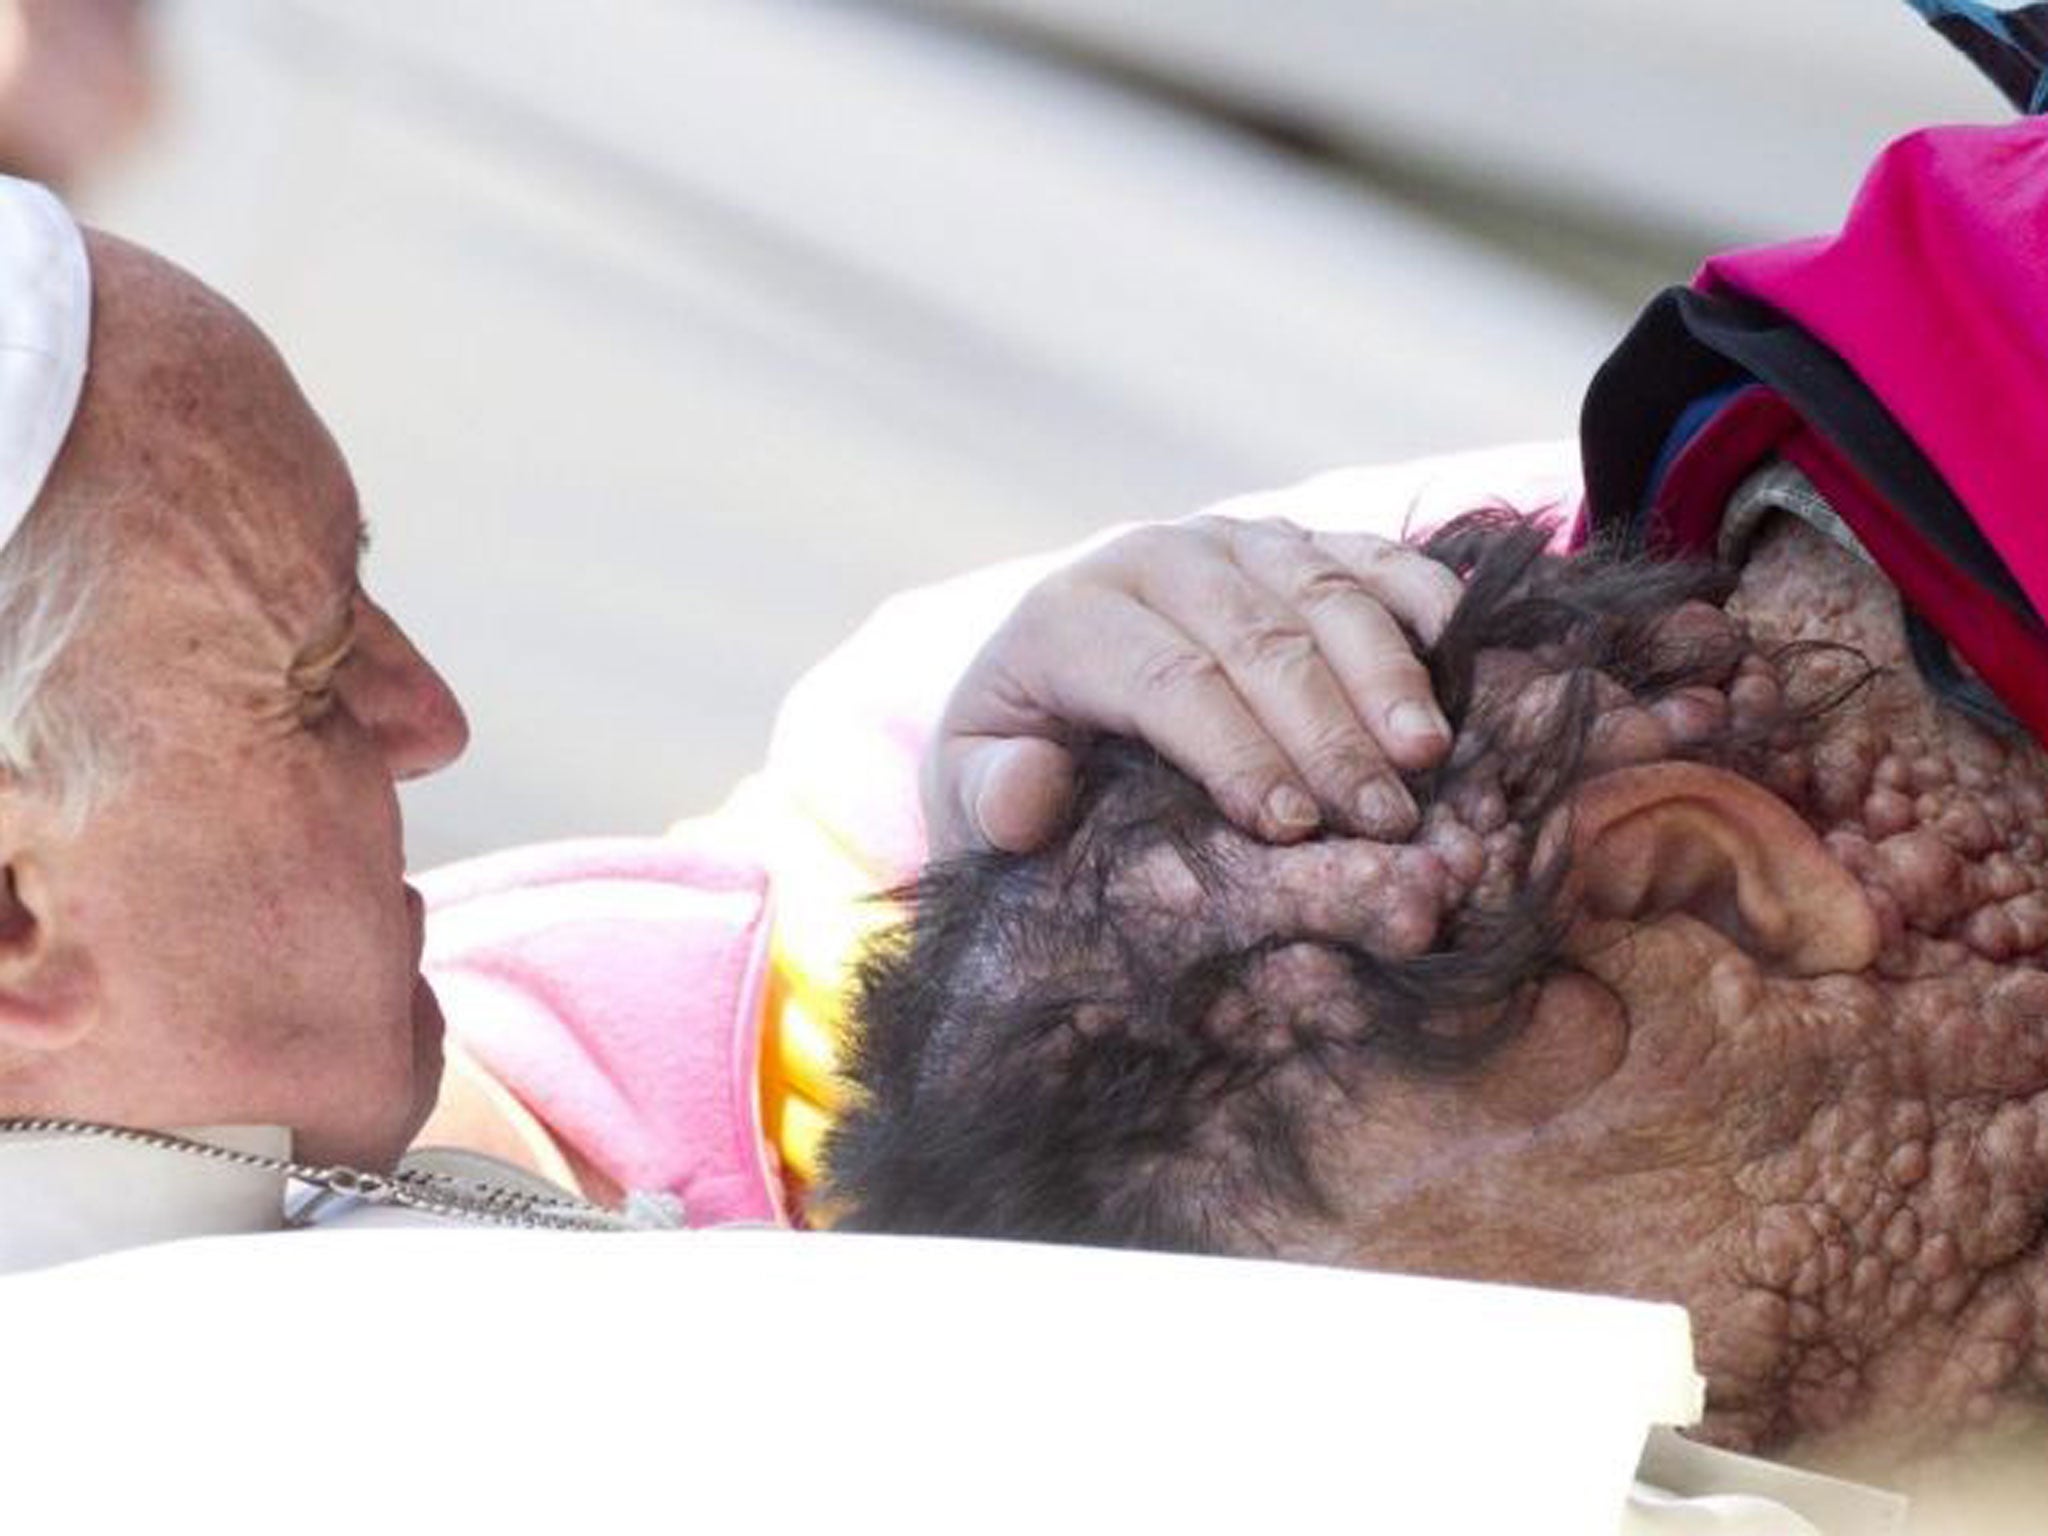 Pope Francis caresses a sick person in Saint Peter's Square at the end of his General Audience in Vatican City